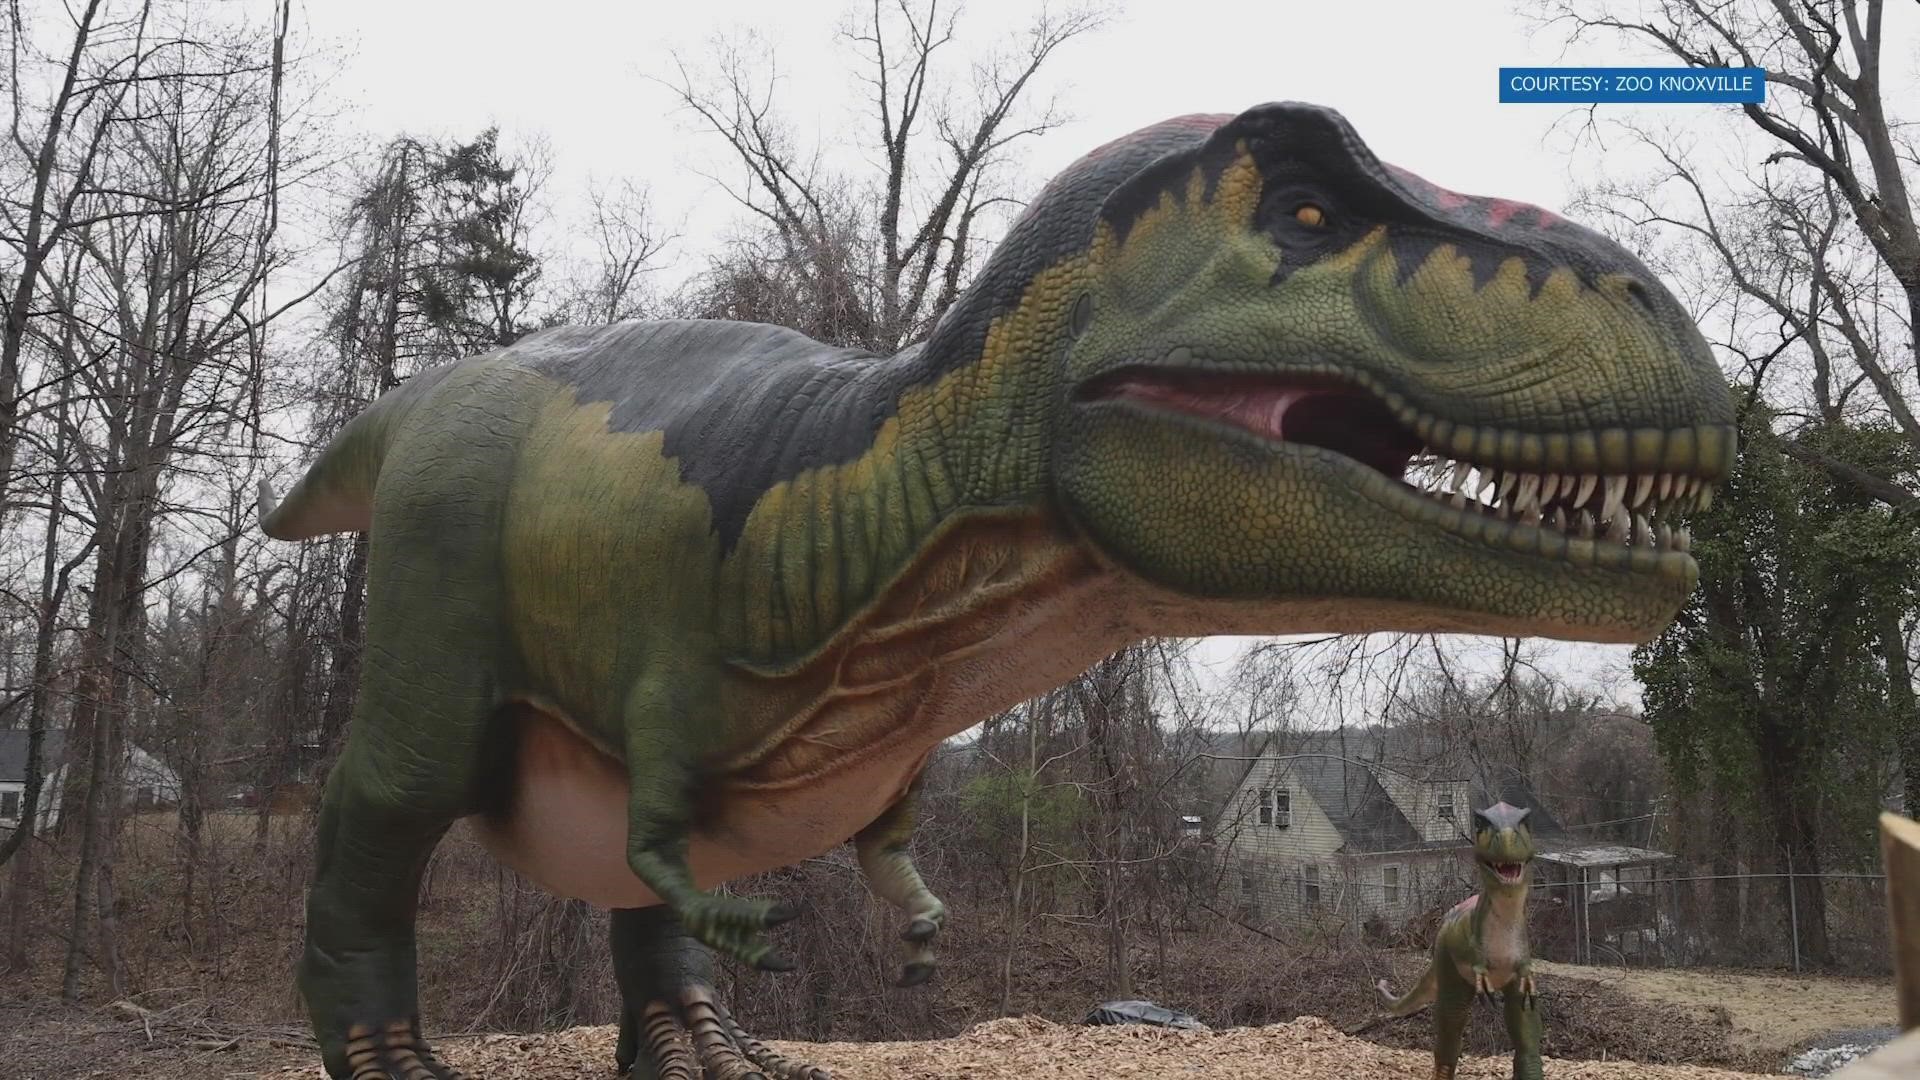 Zoo Knoxville is bringing the dinosaurs back to life for an amazing chance to see some of Earth's first creatures walk among us.